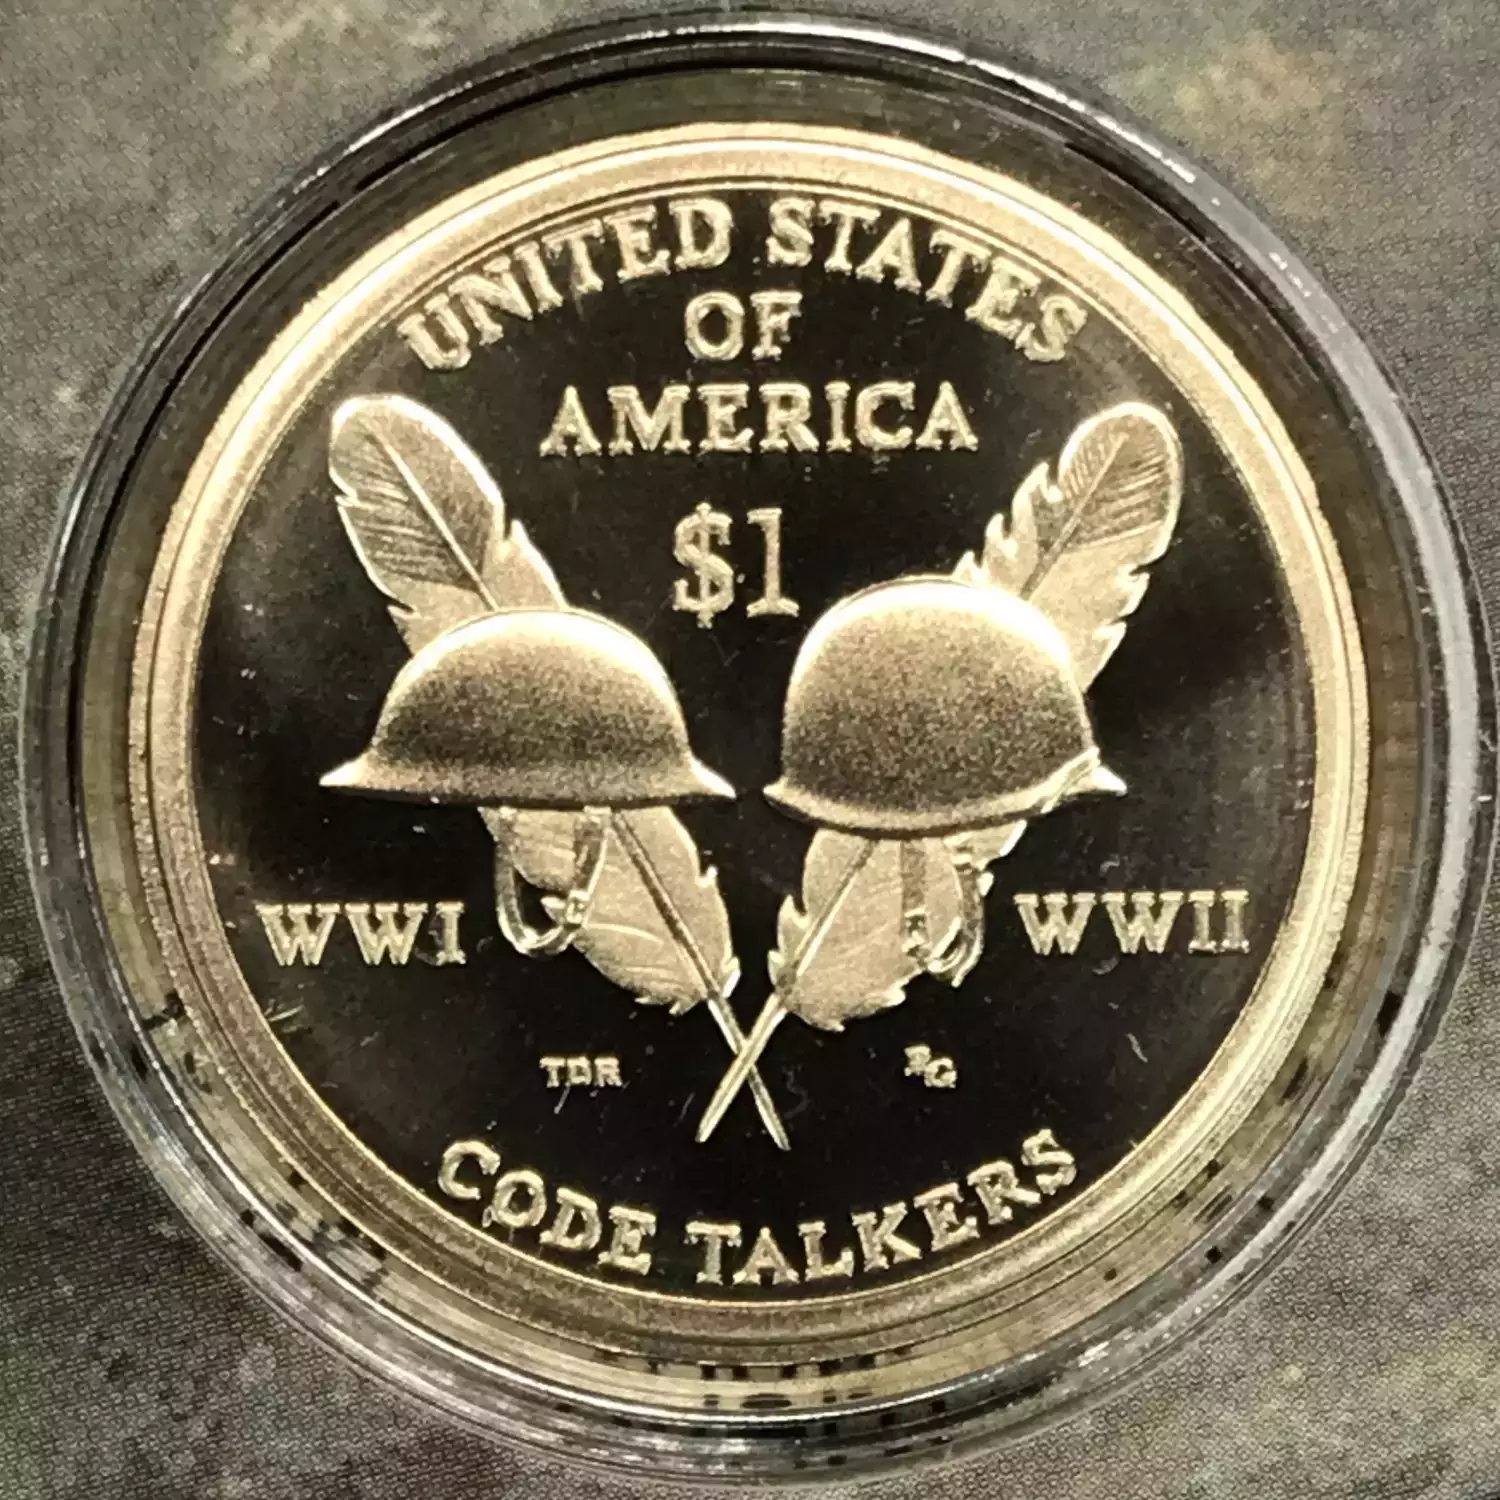 2016 Native American Code Talkers Enhanced Uncirculated $1 Coin & Currency Set